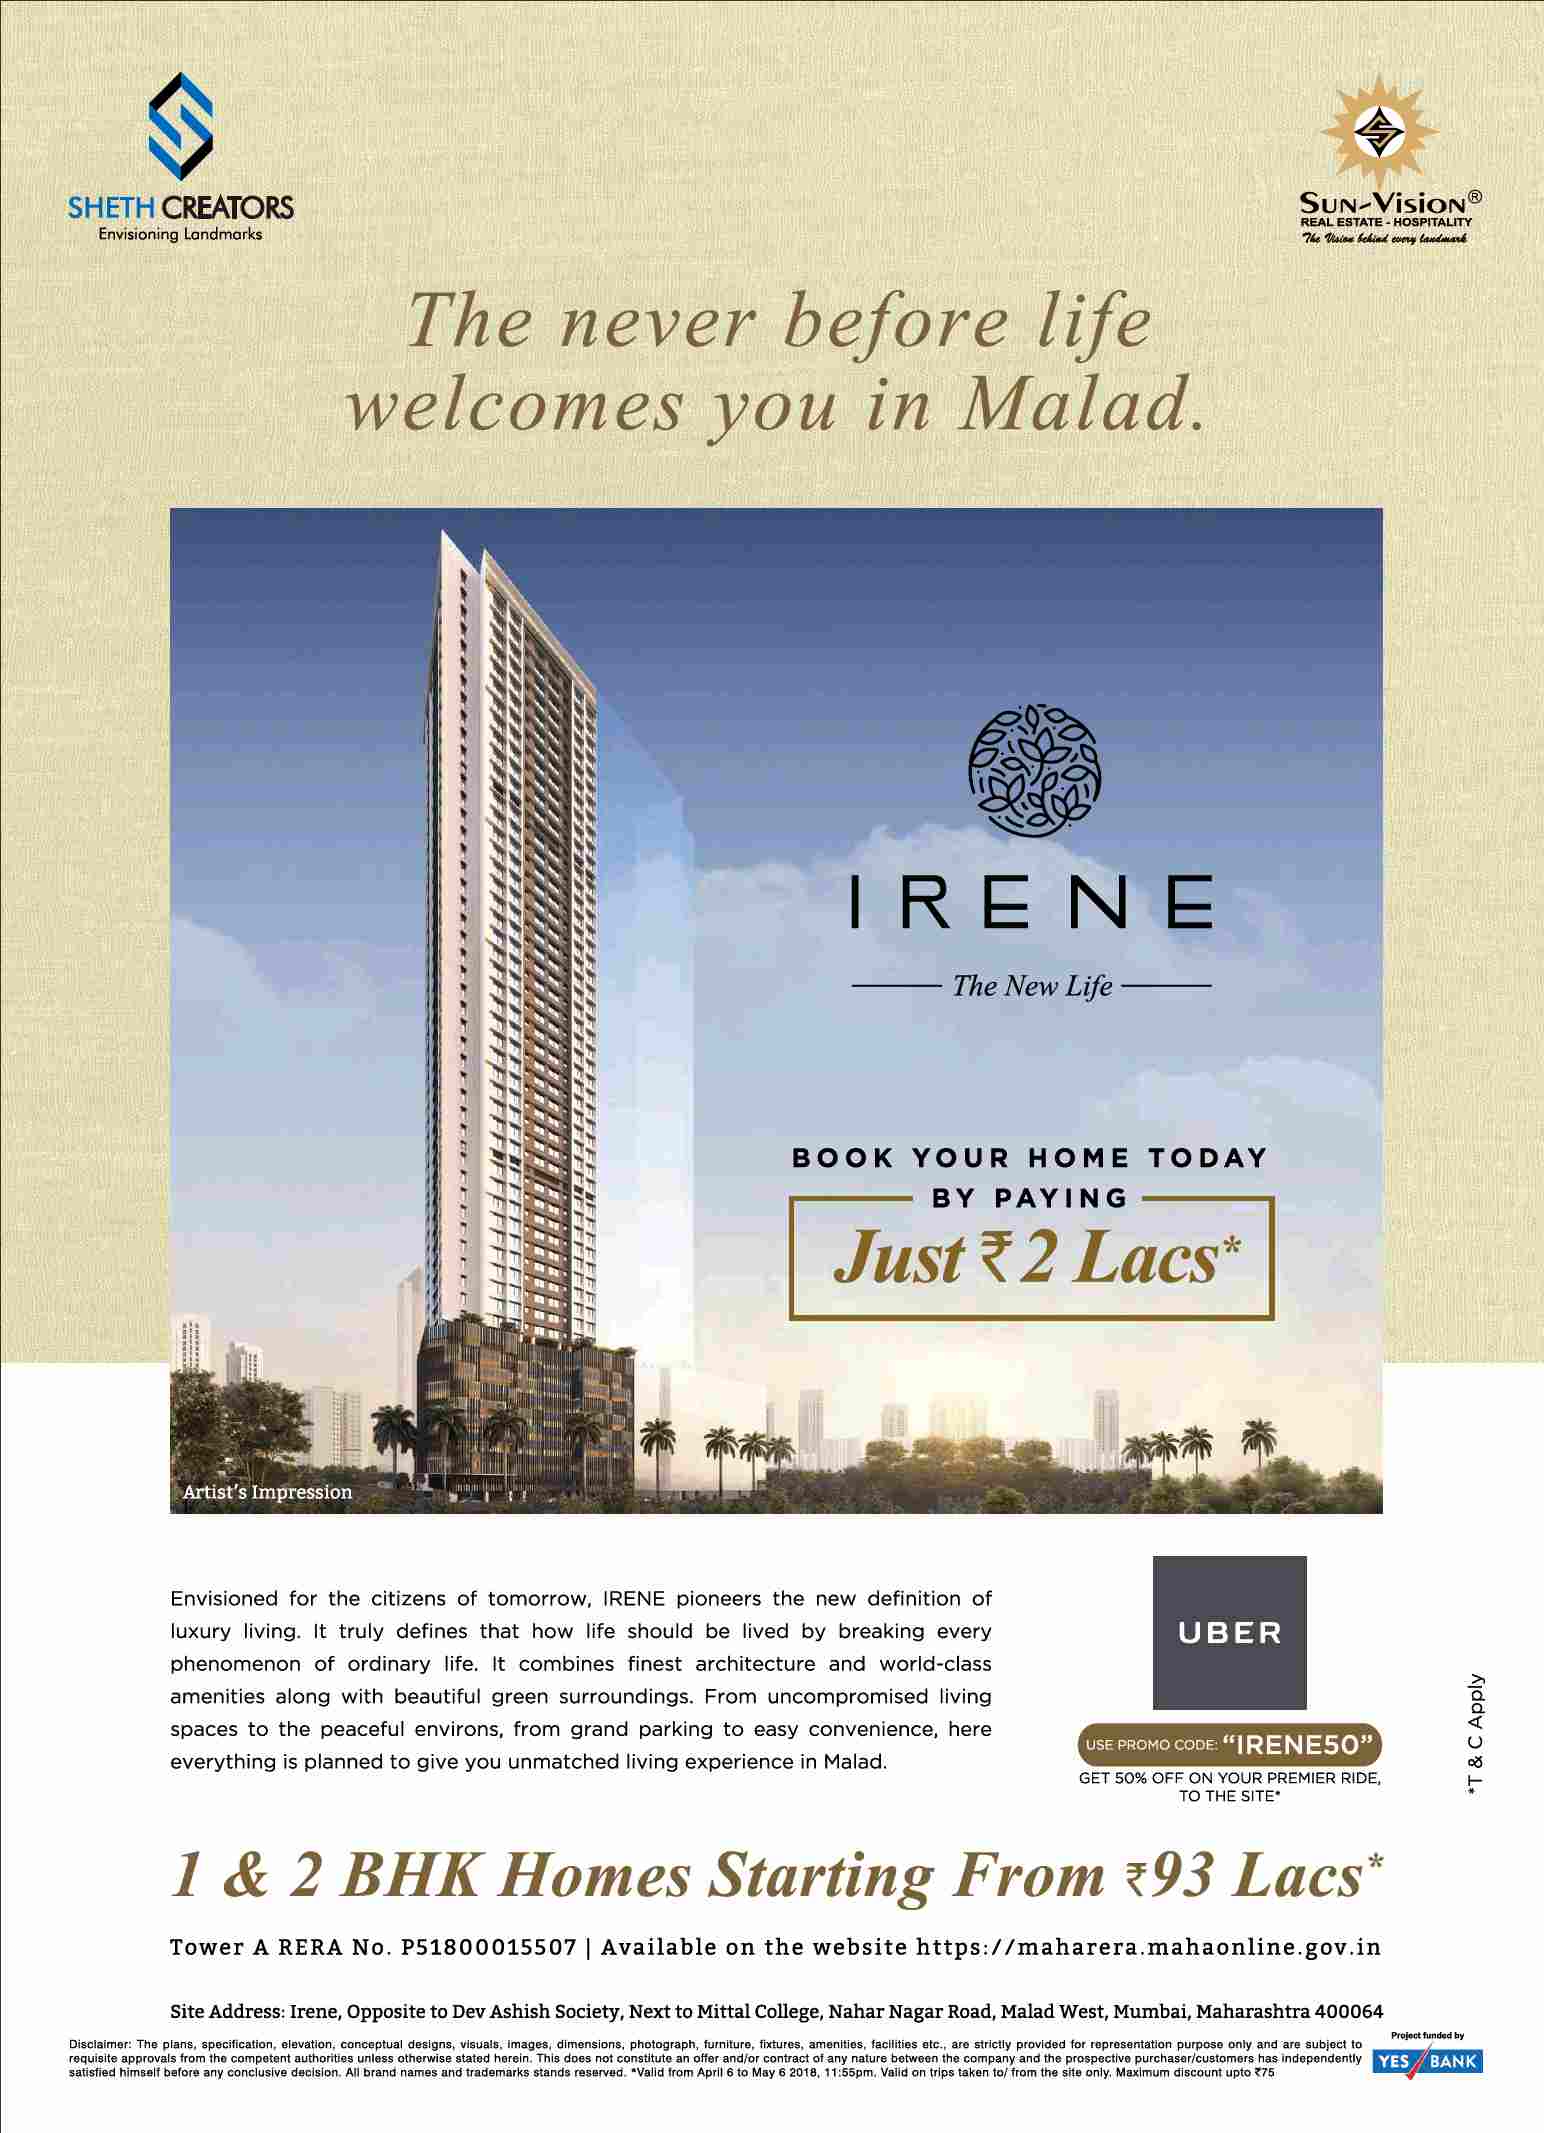 Book your home today by paying just Rs. 2 Lacs at Sheth Irene in Mumbai